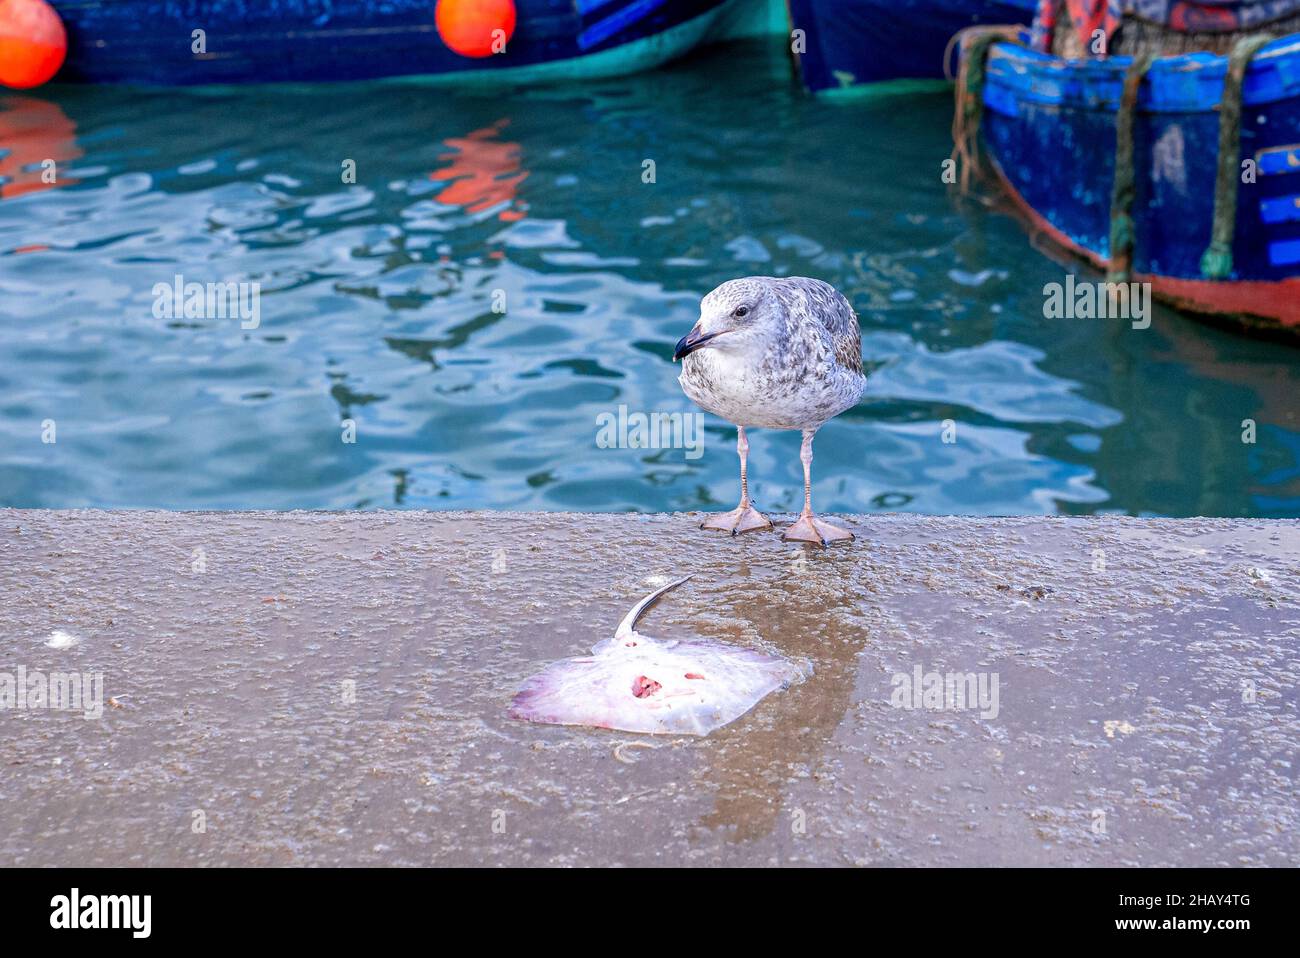 Seagull in front of stingray fish on concrete floor at dock Stock Photo